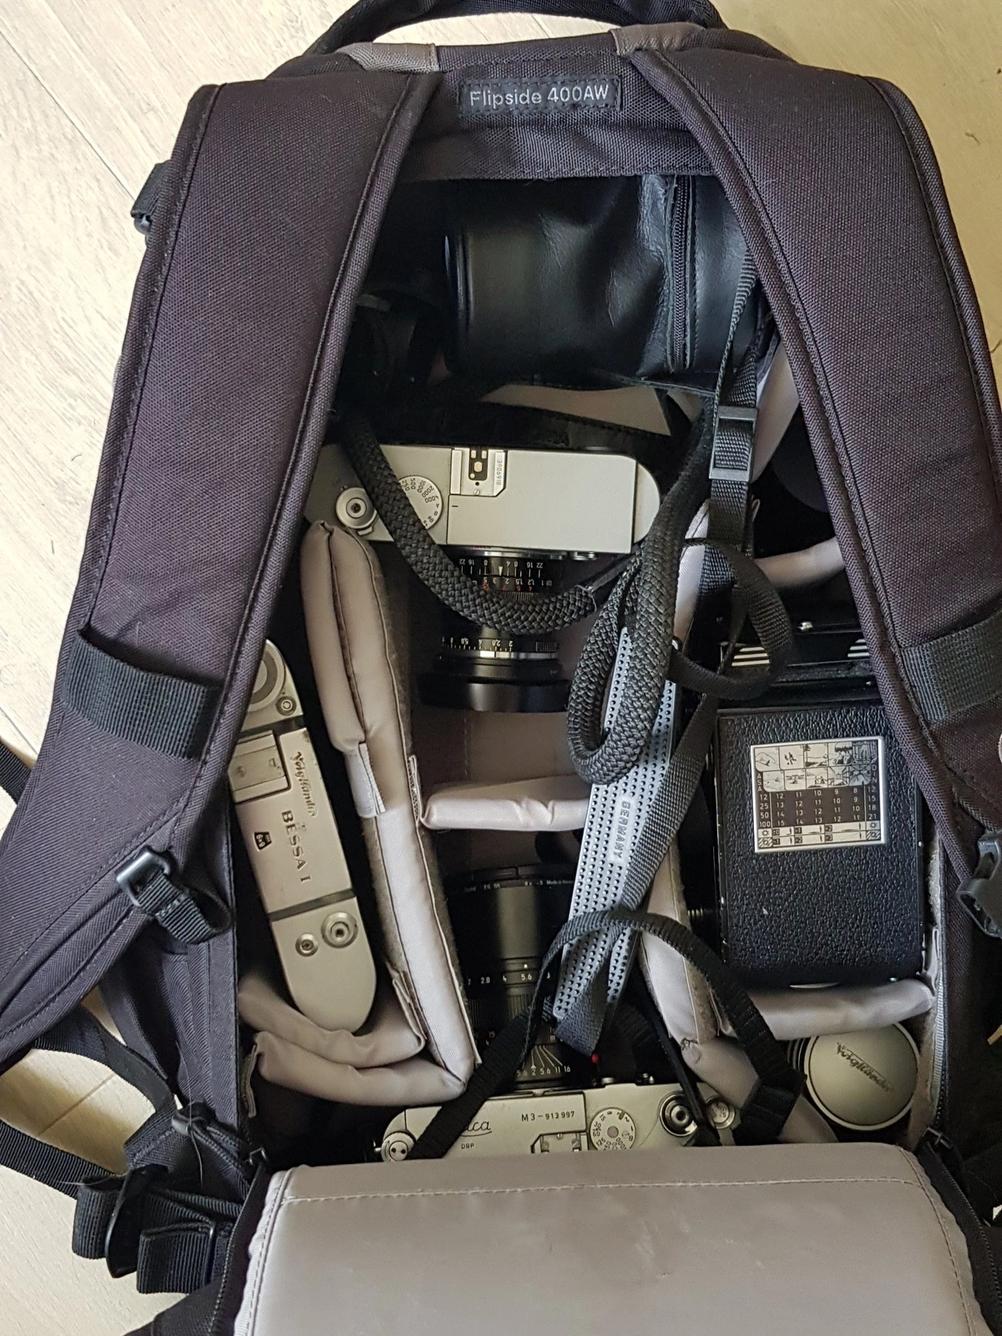 Photo of Lowepro Flipside 400AW bag full of photo related things.